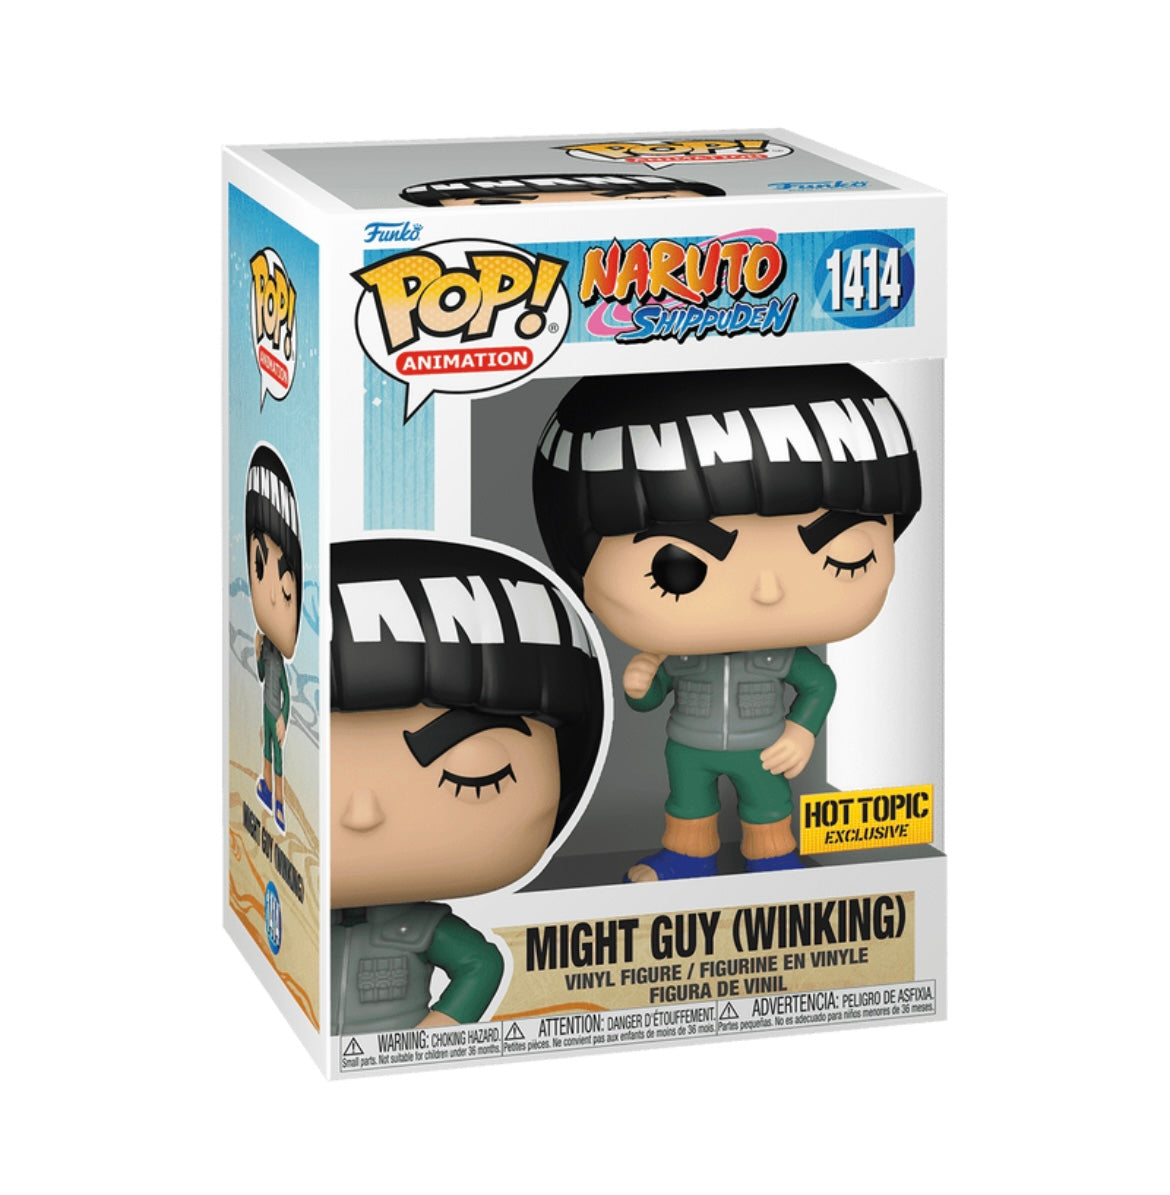 Funko Pop! Naruto Shippuden Might Guy (Winking) Hot Topic Exclusive